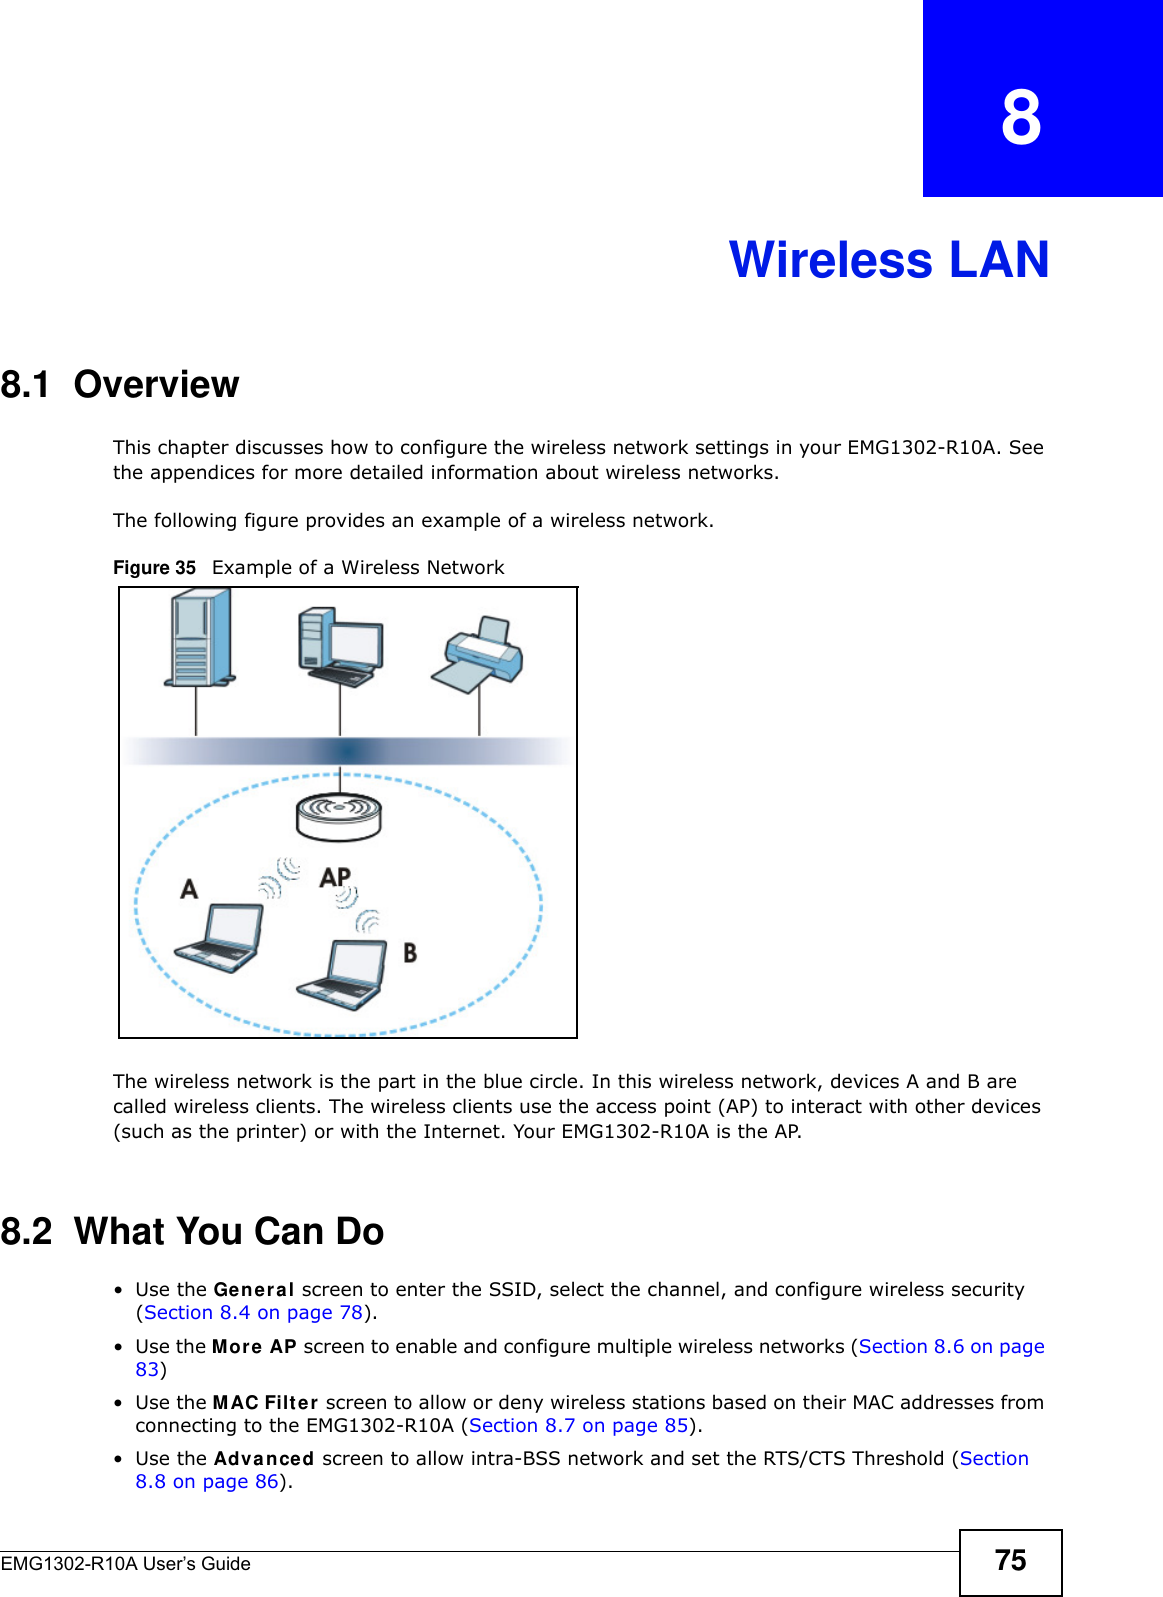 EMG1302-R10A User’s Guide 75CHAPTER   8Wireless LAN8.1  OverviewThis chapter discusses how to configure the wireless network settings in your EMG1302-R10A. See the appendices for more detailed information about wireless networks.The following figure provides an example of a wireless network.Figure 35   Example of a Wireless NetworkThe wireless network is the part in the blue circle. In this wireless network, devices A and B are called wireless clients. The wireless clients use the access point (AP) to interact with other devices (such as the printer) or with the Internet. Your EMG1302-R10A is the AP.8.2  What You Can Do•Use the Ge n e r a l screen to enter the SSID, select the channel, and configure wireless security (Section 8.4 on page 78).•Use the More AP screen to enable and configure multiple wireless networks (Section 8.6 on page 83)•Use the MAC Filte r  screen to allow or deny wireless stations based on their MAC addresses from connecting to the EMG1302-R10A (Section 8.7 on page 85).•Use the Adva nced screen to allow intra-BSS network and set the RTS/CTS Threshold (Section 8.8 on page 86).